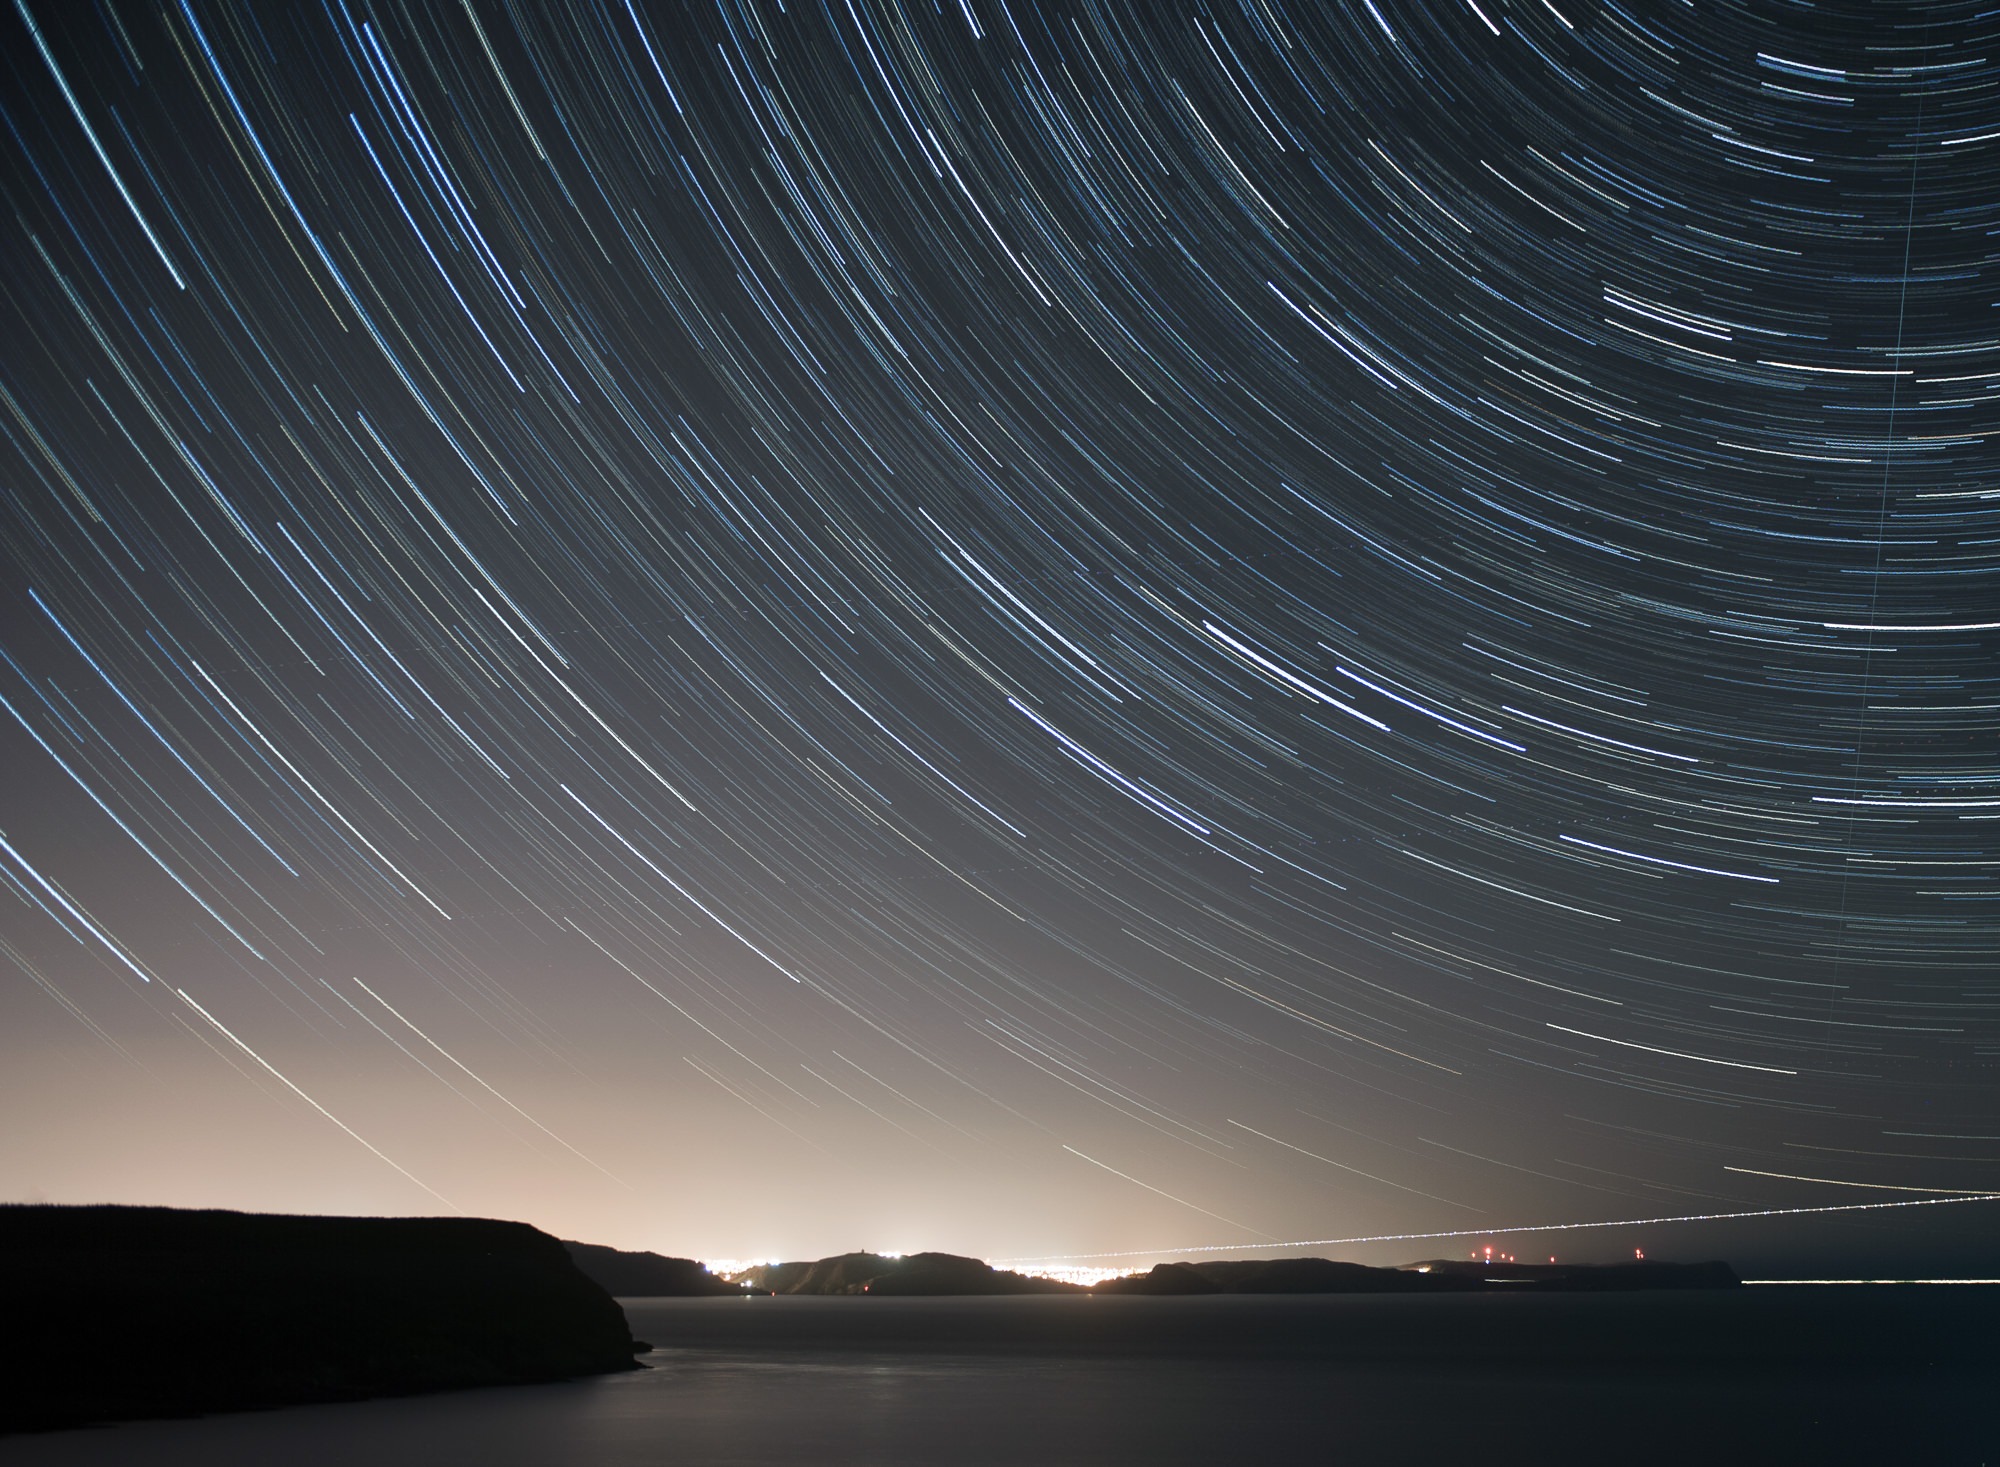 This image is made from 95 images, each 30 seconds in length at f/2.8 ISO200. Body: Nikon D3 and 24-70 lens, cropped to 8×10, shot from Cape Spear, Newfoundland This is an image that I’ve had in mind for a while but hadn’t actually remembered to go shoot. The trick with this is that you can’t just open the shutter for a long period of time, ie: 30 minutes. If you were to do that, the light pollution from the city would eventually over power the stars and you’d have nothing but a glow of city light and very few stars. So how do we do this? Well to start you’re going to need either a body capable of interval shooting or a cable release with a shutter lock. Once you’ve got one of those, you’re going to need to shoot a LOT of images, all at the same settings, over the course of 20-30minutes (or longer really, longer the better). Once you’ve got your 100 or so images, each a long exposure, you’ll be combining them in Photoshop to form one image, like the one below. In this photo you can see the stars which make up the big dipper, planes landing at St. John’s International Airport (CYYT), a boat going out to sea, the car lights from Signal Hill, Fort Amherst and the East End of St. John’s.